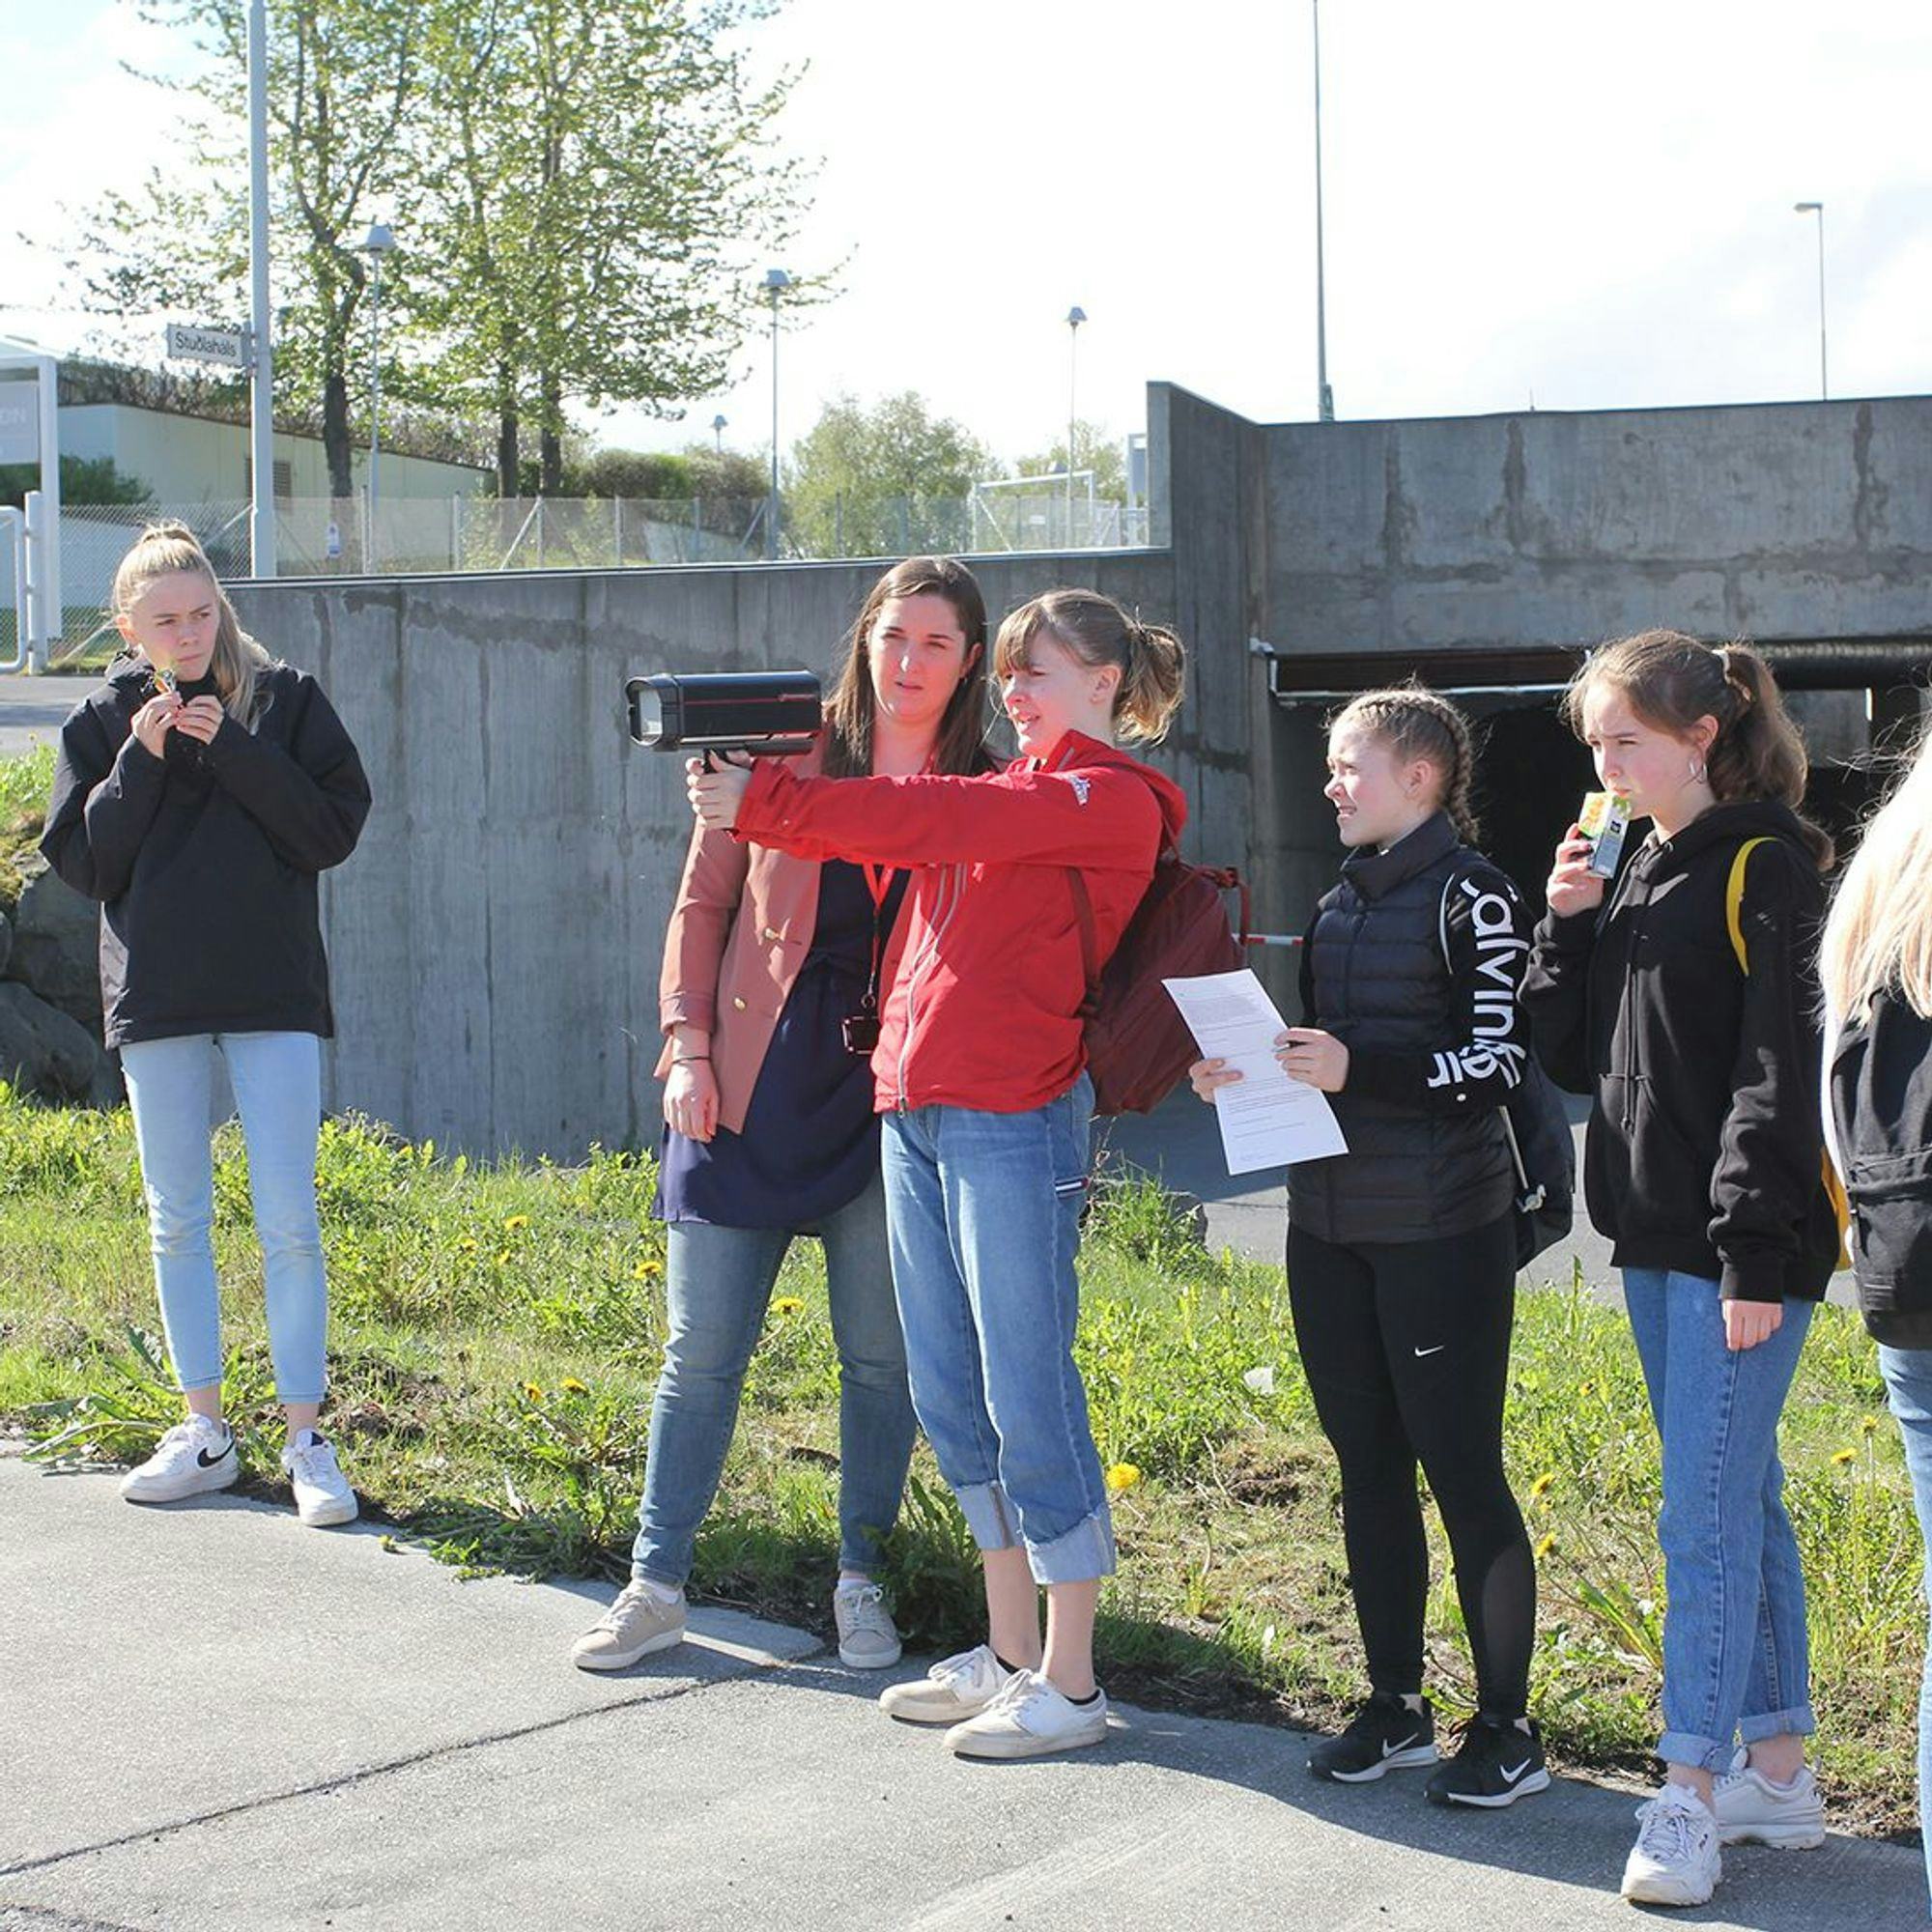 A group of young people outdoors, holding car speed reading machine and and a paper